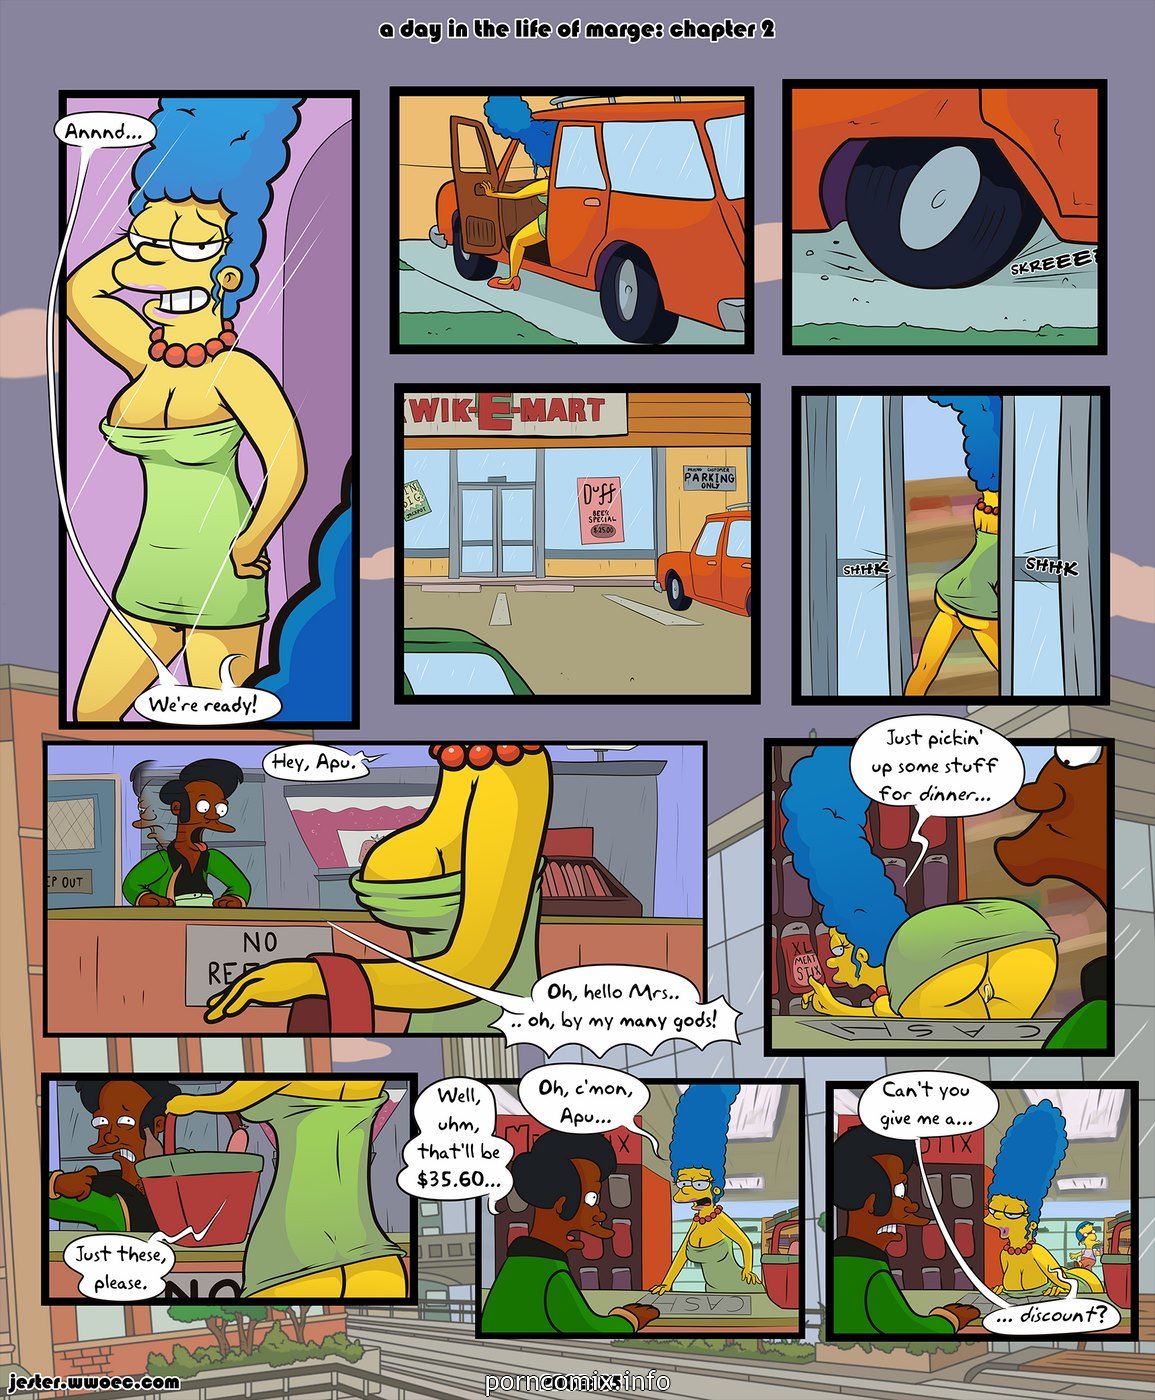 [Blargsnarf] A Day in the Life of Marge 2 (The Simpsons) page 5